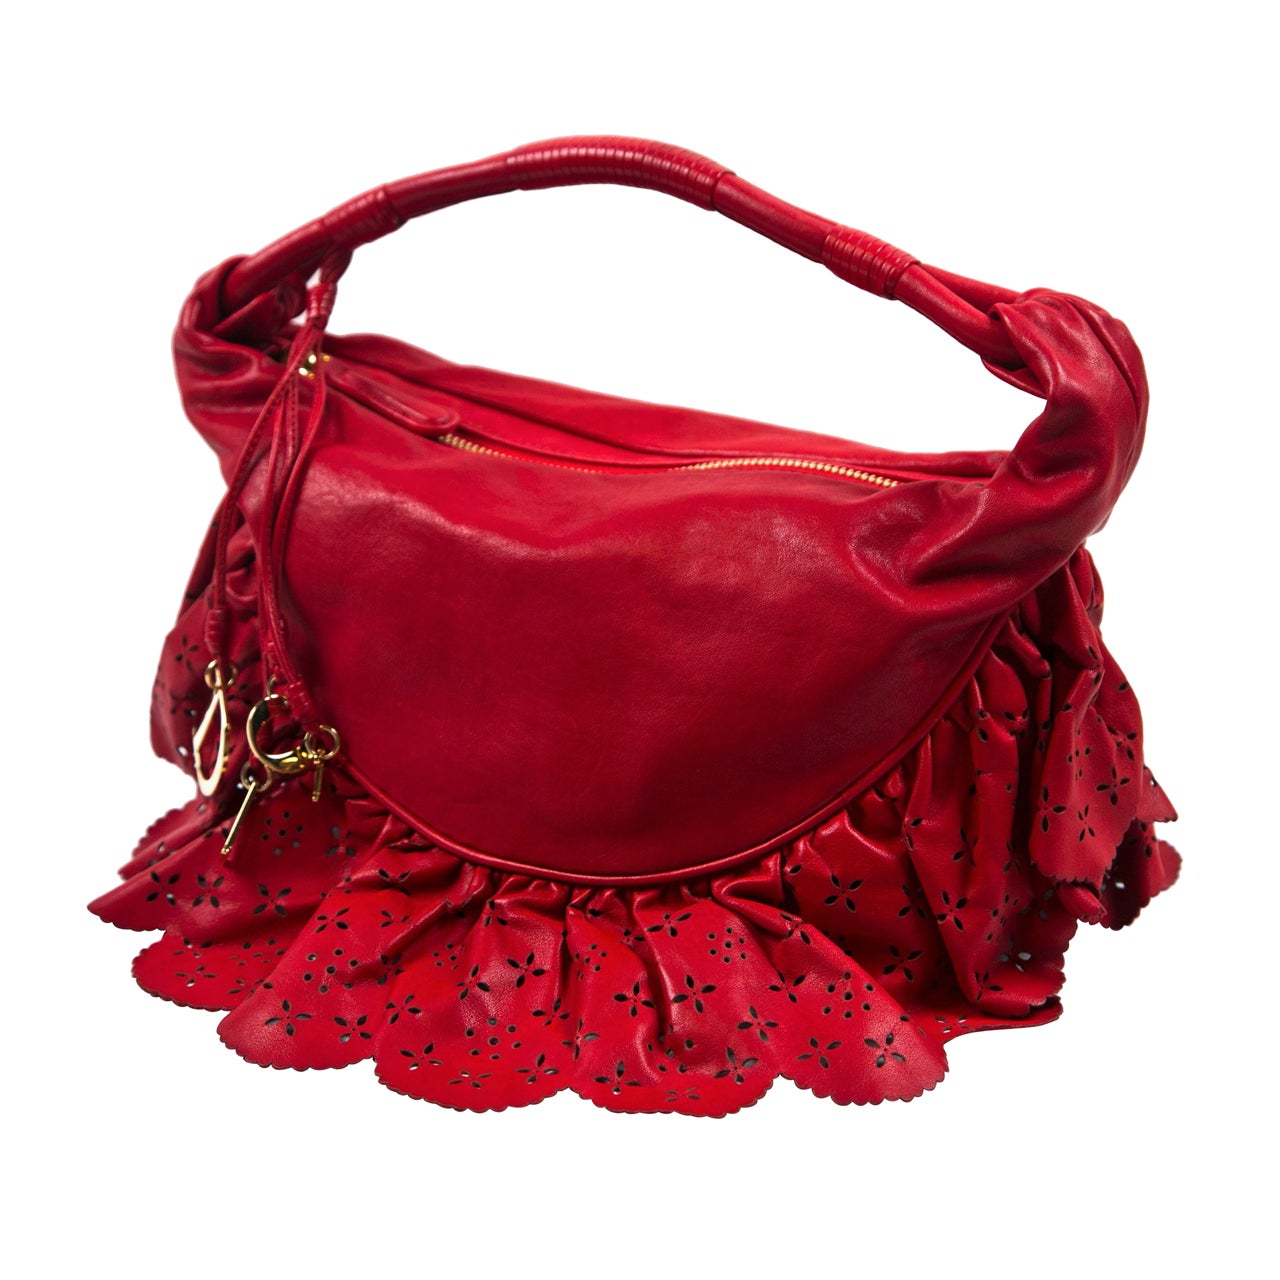 Red Leather Christian Dior Handbag with Reticulated Ruffles Presented by Carol Marks